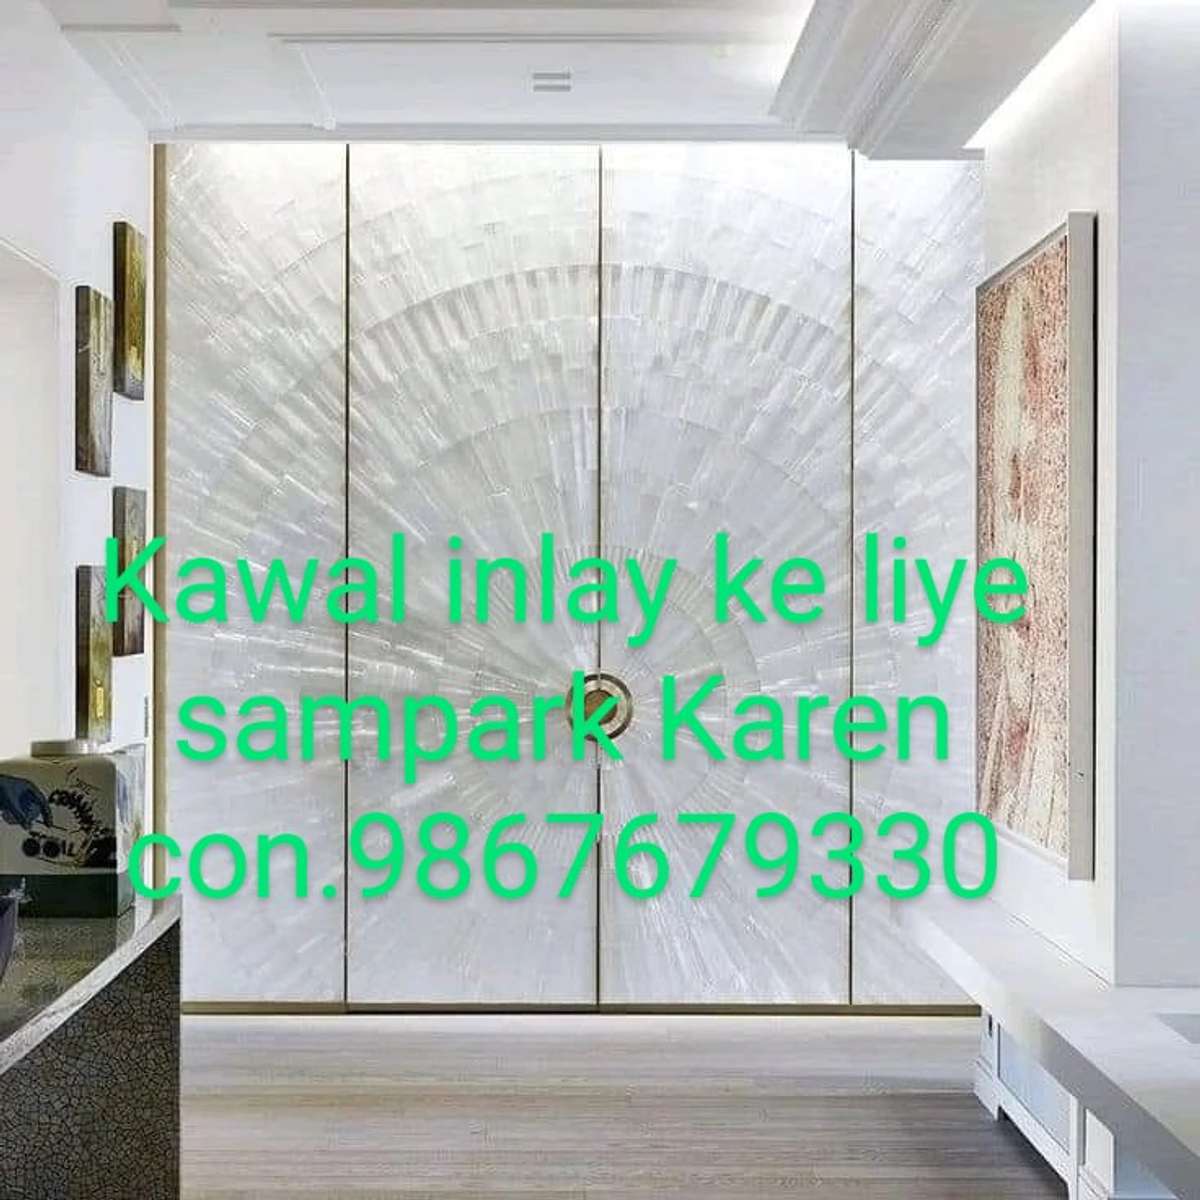 indian inlay art.exclusive interior products-solid surfaces,alabaster,mother of pearl,semi precious stones,wooden logs.. contact 9867679330